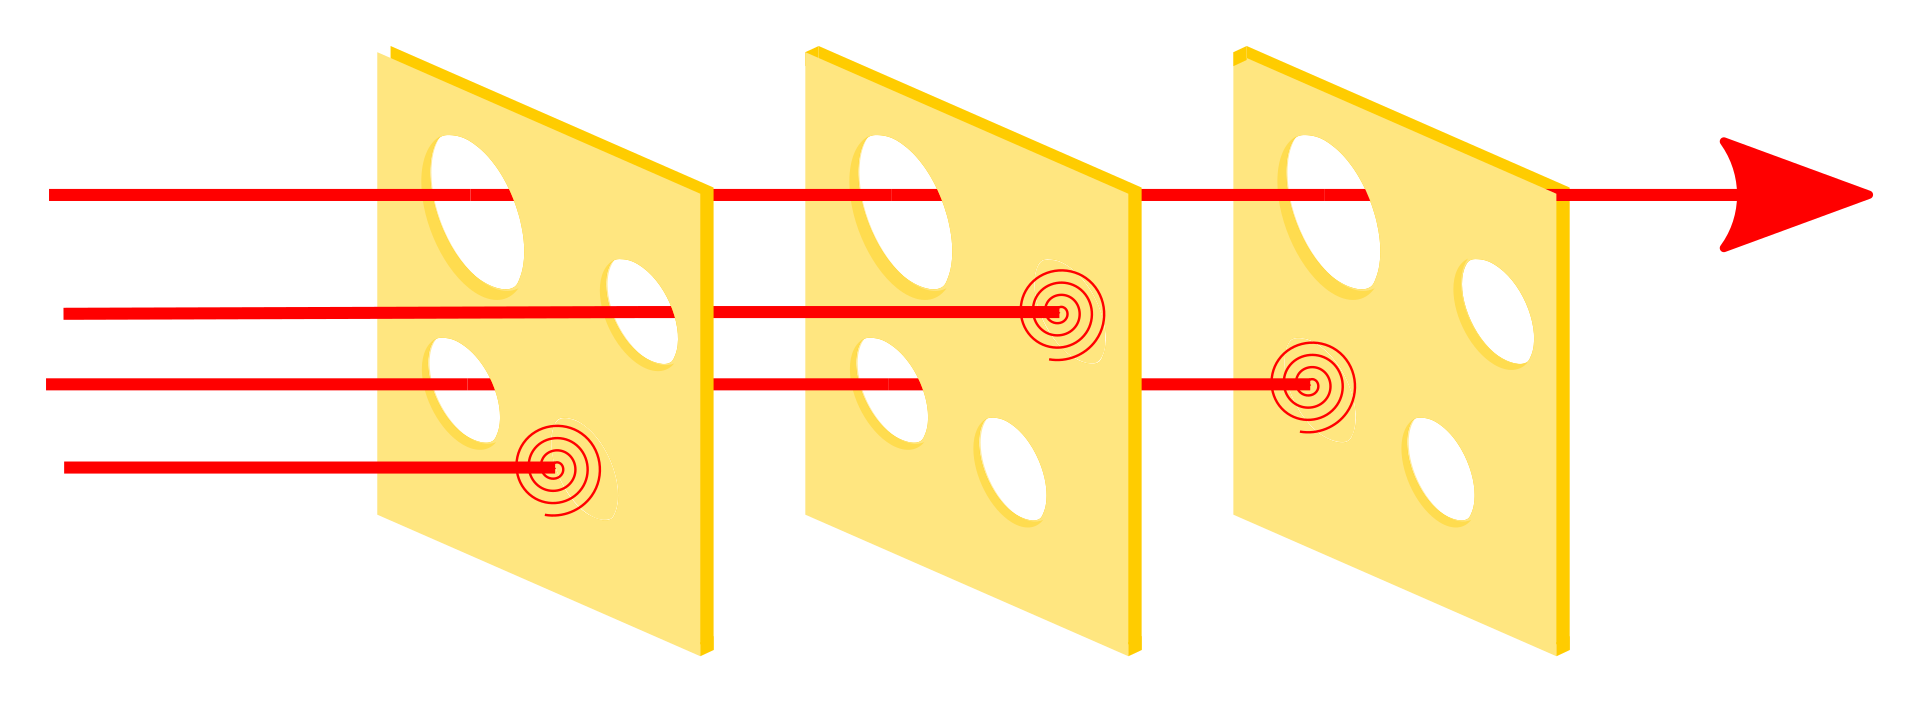 swiss cheese security approach